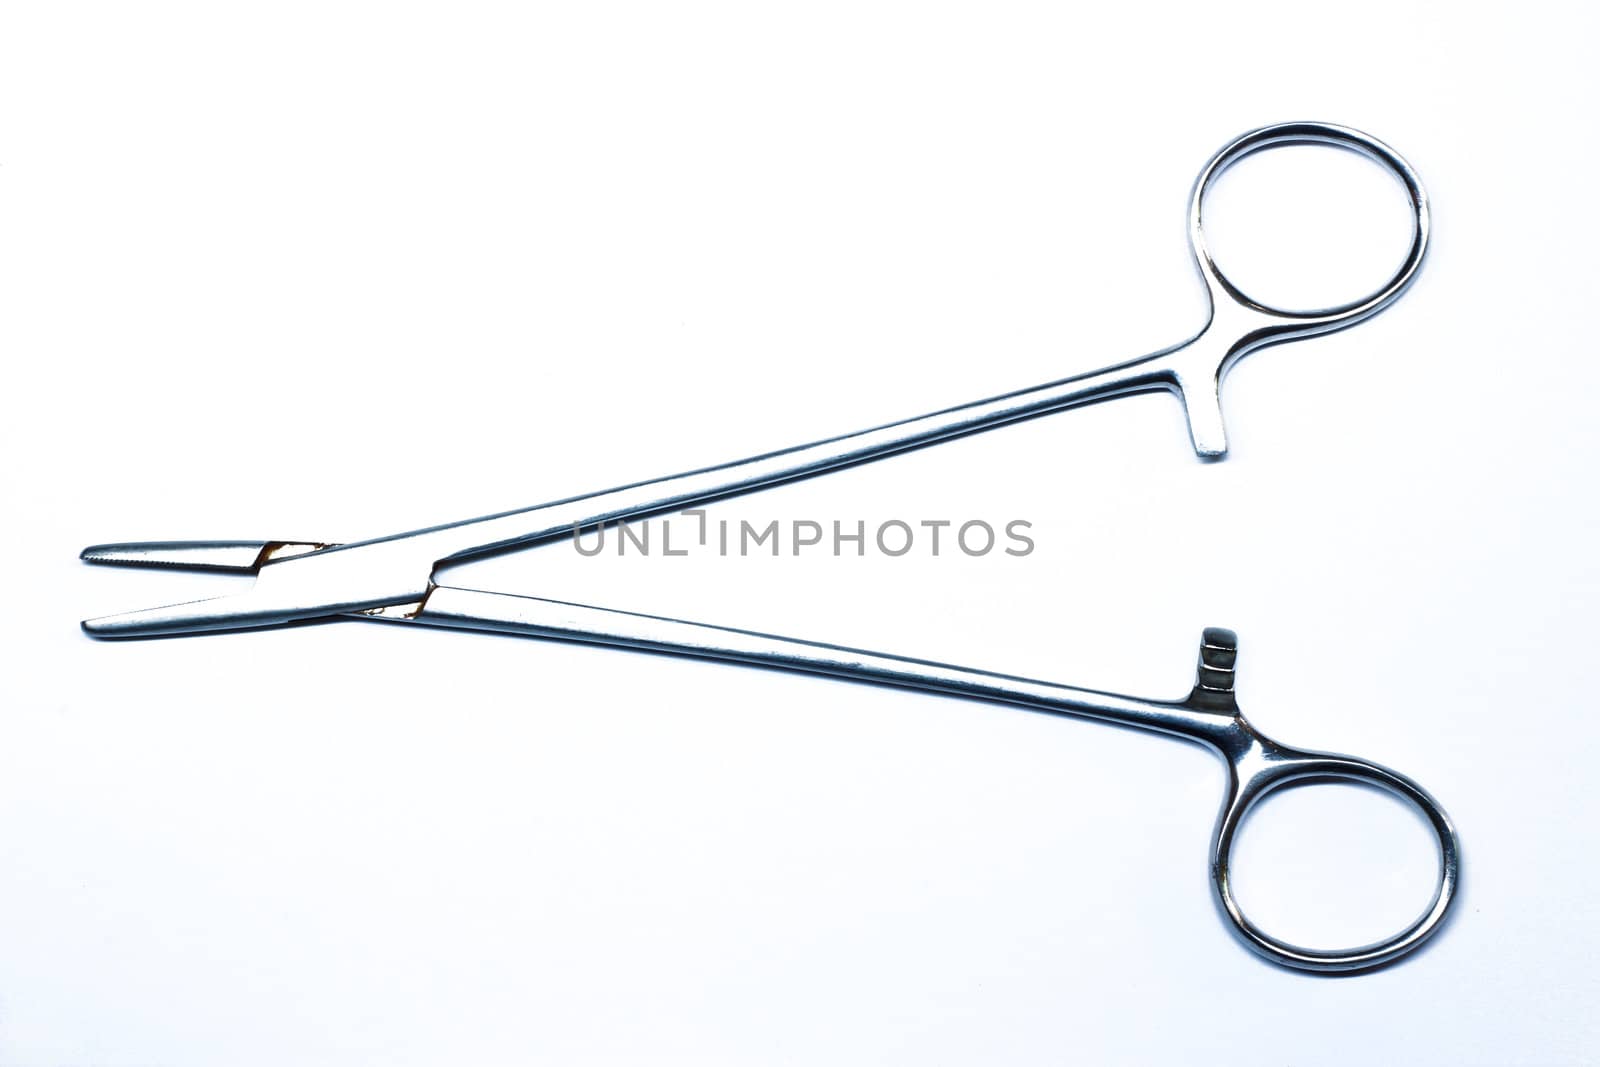 Forceps on a white background